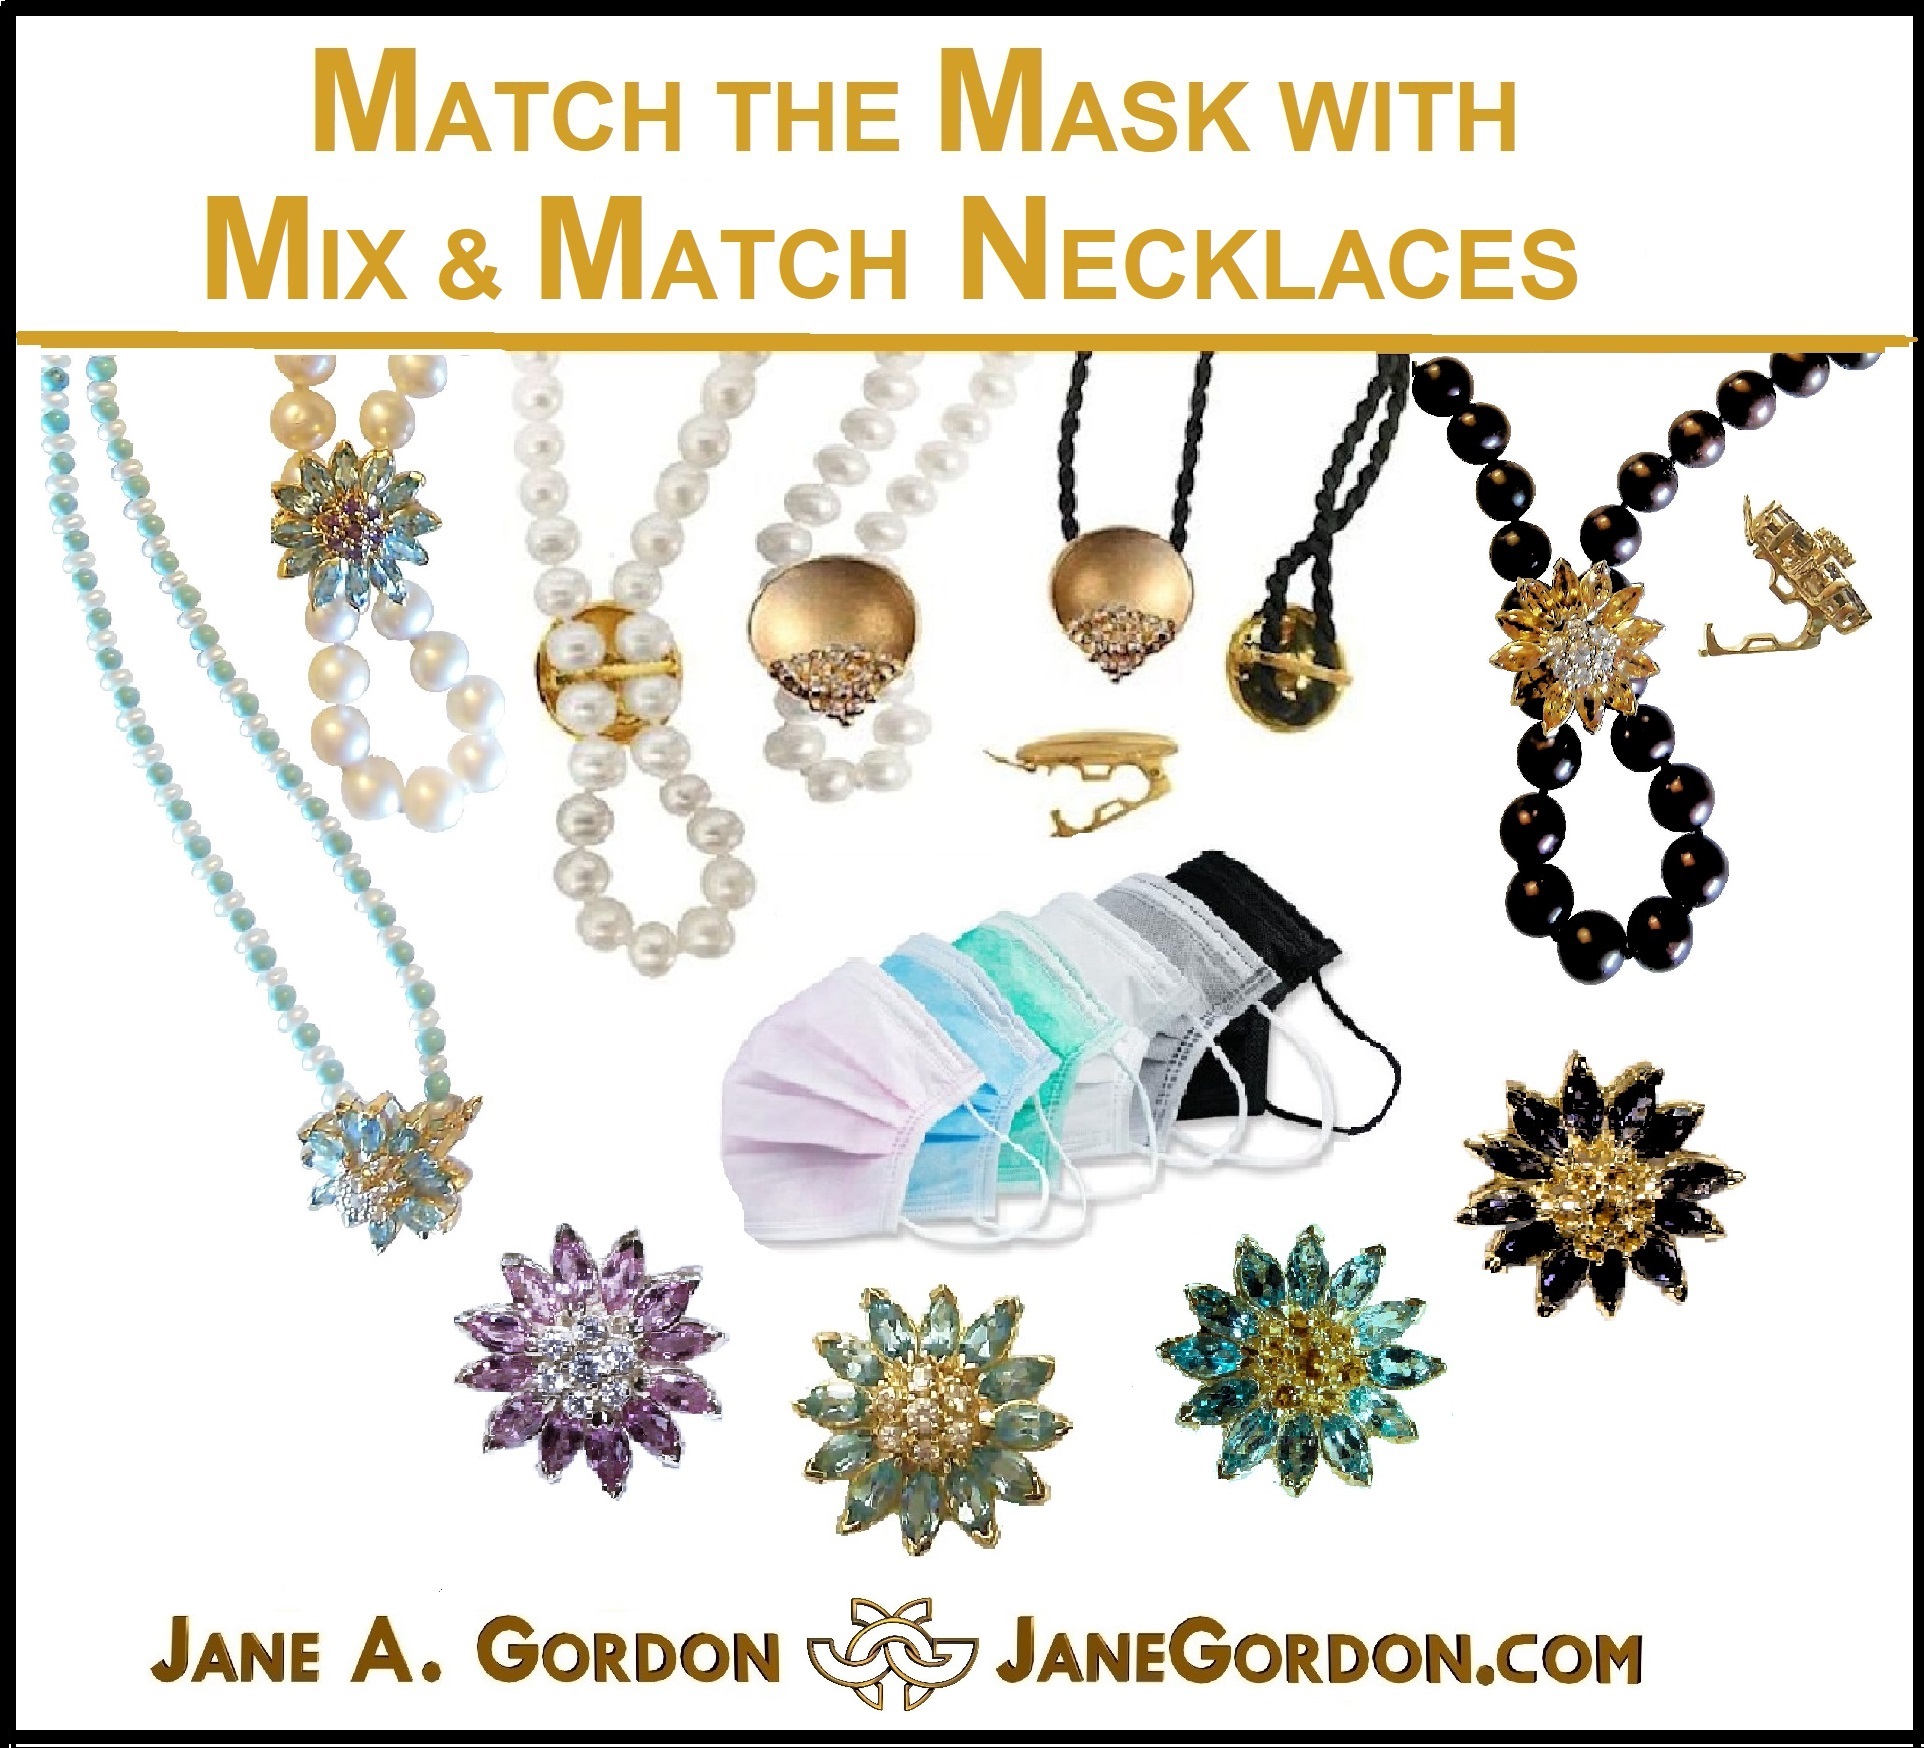 Match the Mask with Interchangeable Necklaces